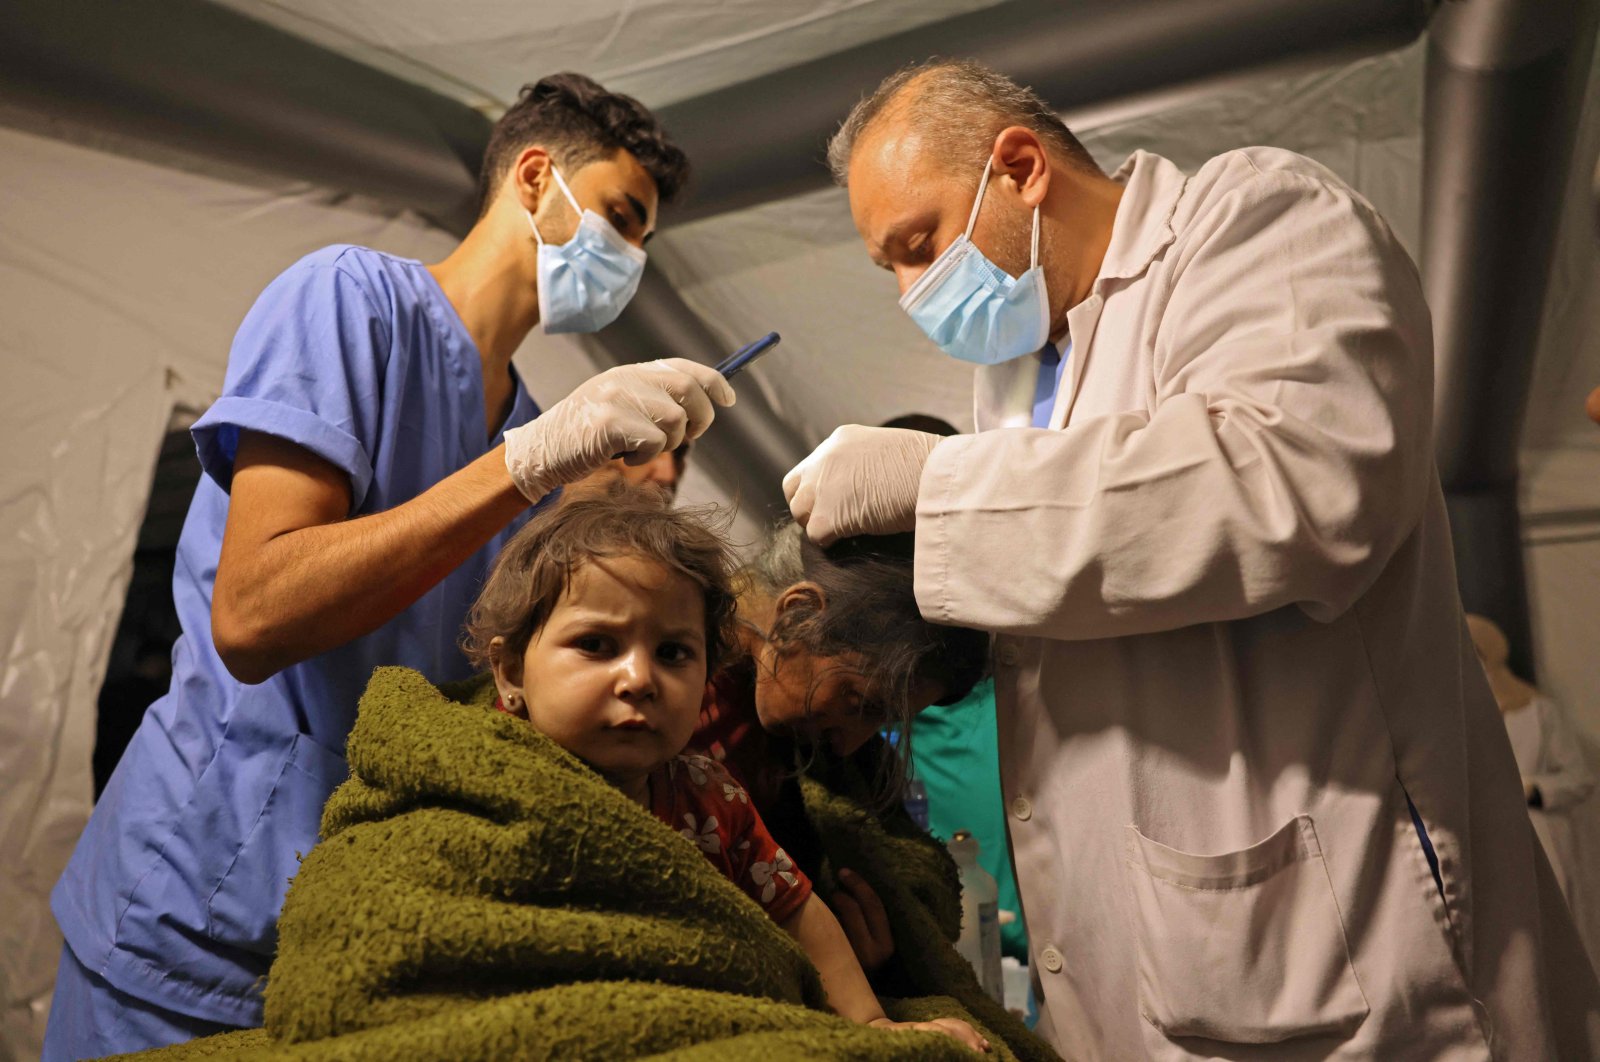 Medics tend to a Palestinian child injured in the aftermath of an Israeli airstrike at a make-shift hospital emergency ward in Rafah in the southern Gaza Strip on May 13, 2021. (AFP Photo)